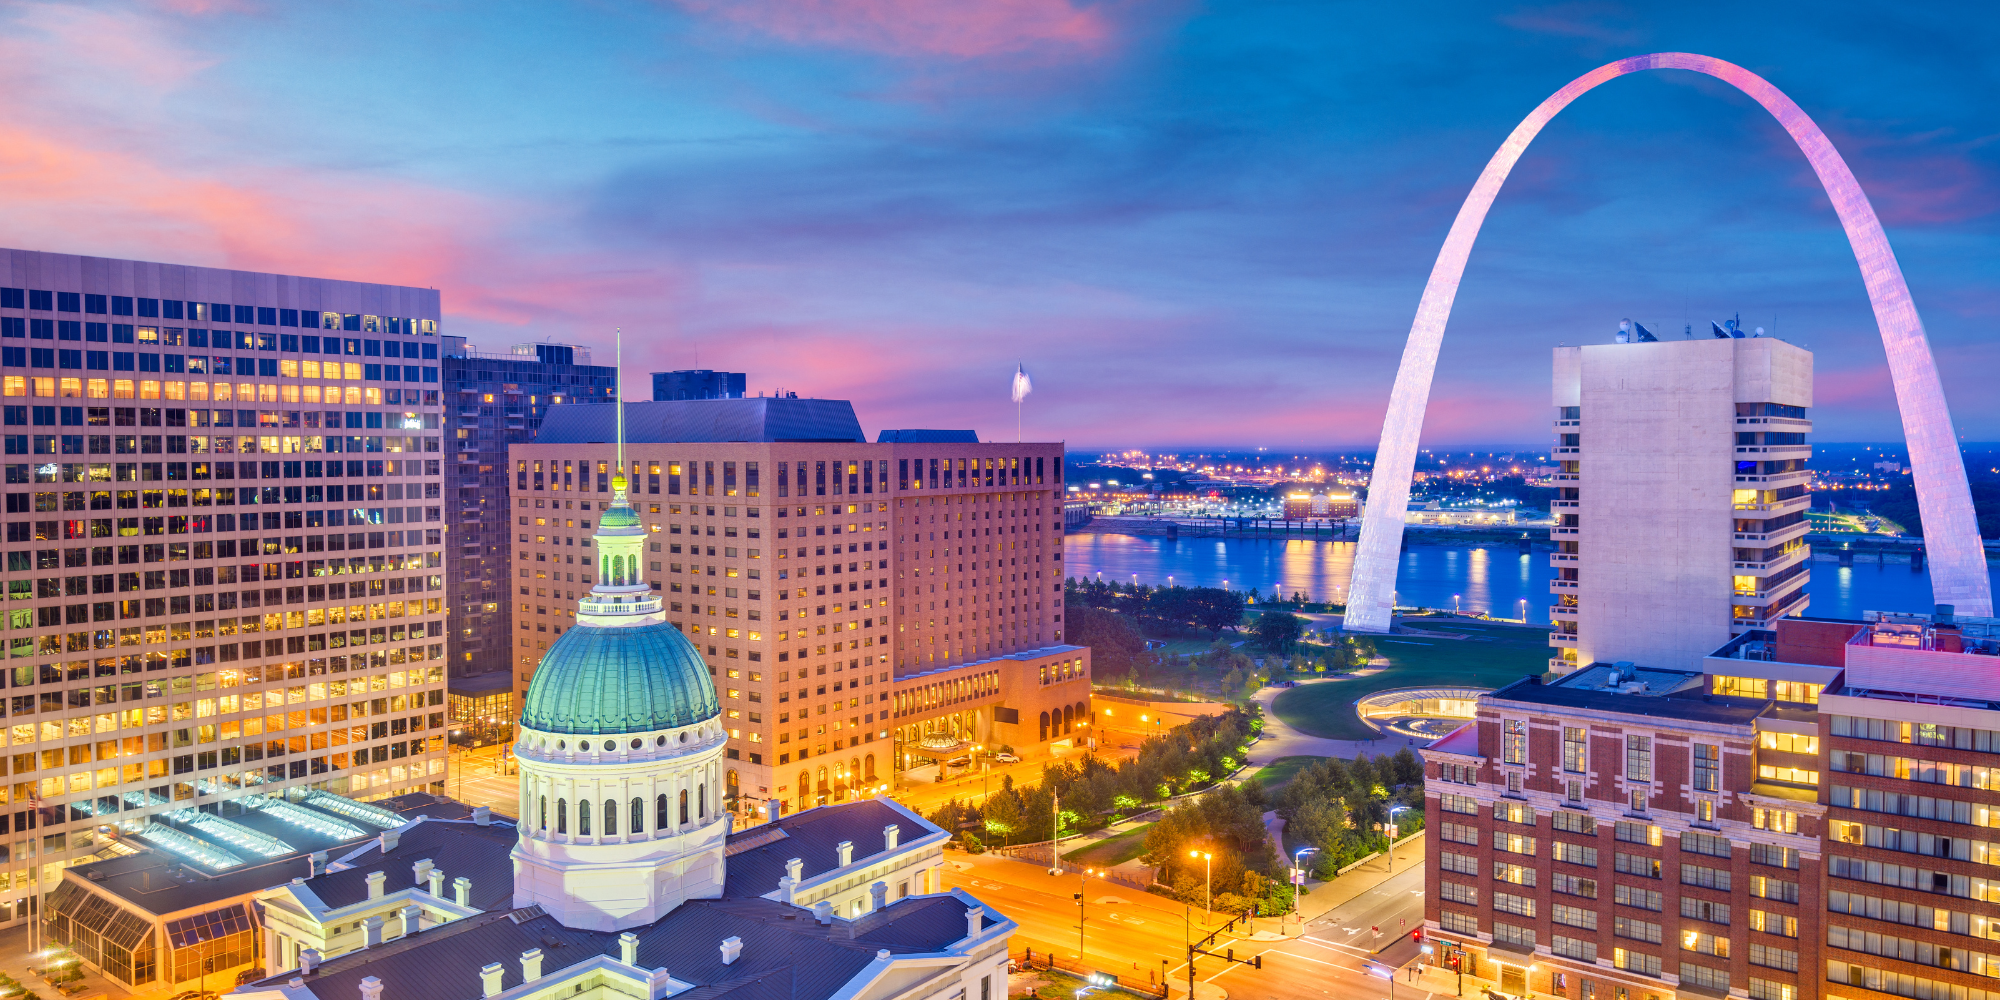 Image of down town St. Louis at twilight. The arch and reflective surface of the Mississippi River beyond are to the right of the image. The city is vibrantly lit up. 